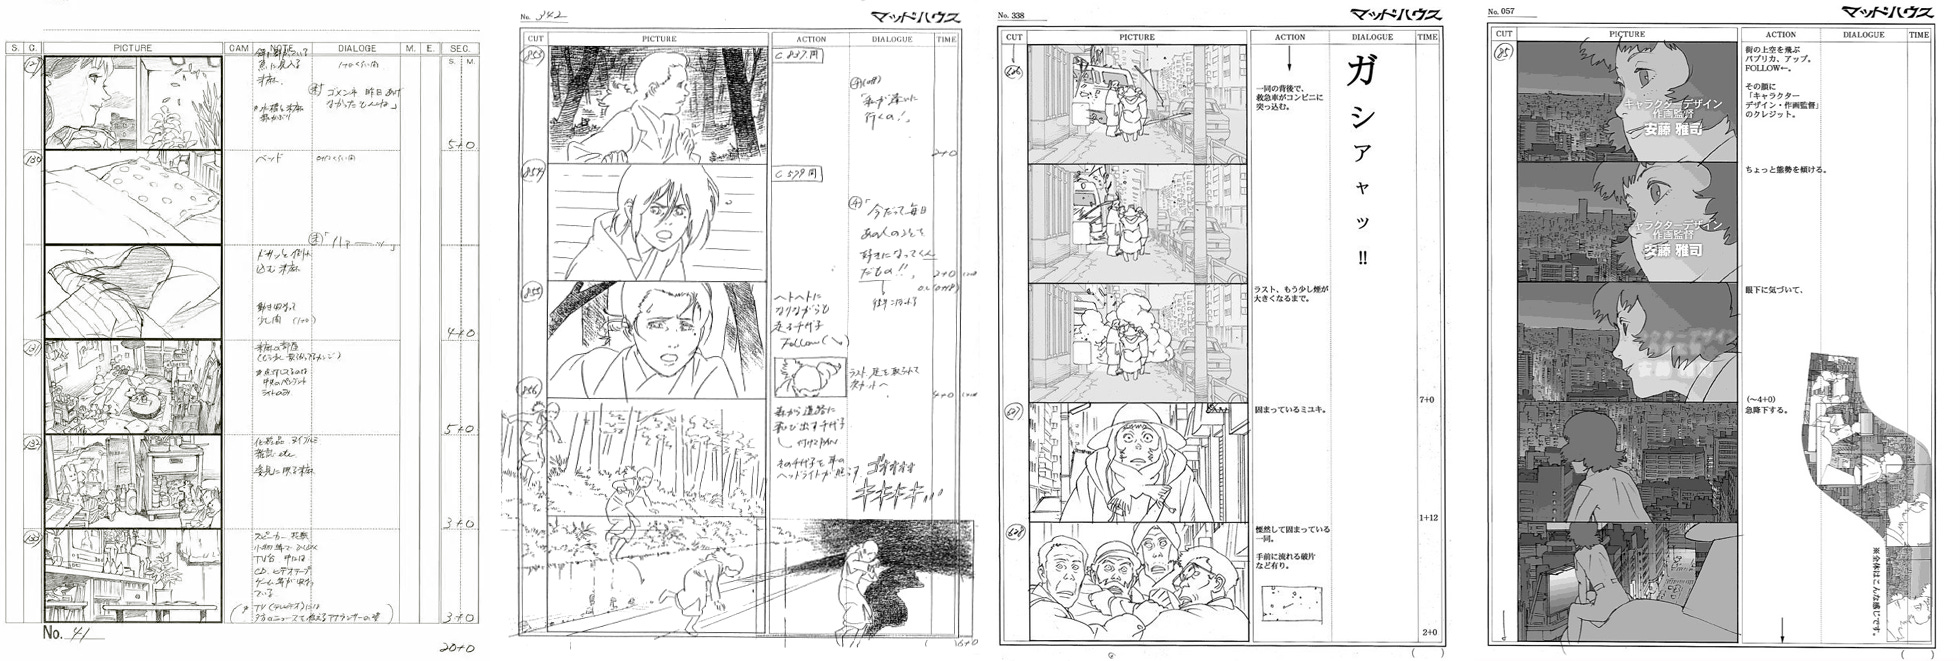 storyboard Archives - Halcyon Realms - Art Book Reviews - Anime, Manga,  Film, Photography